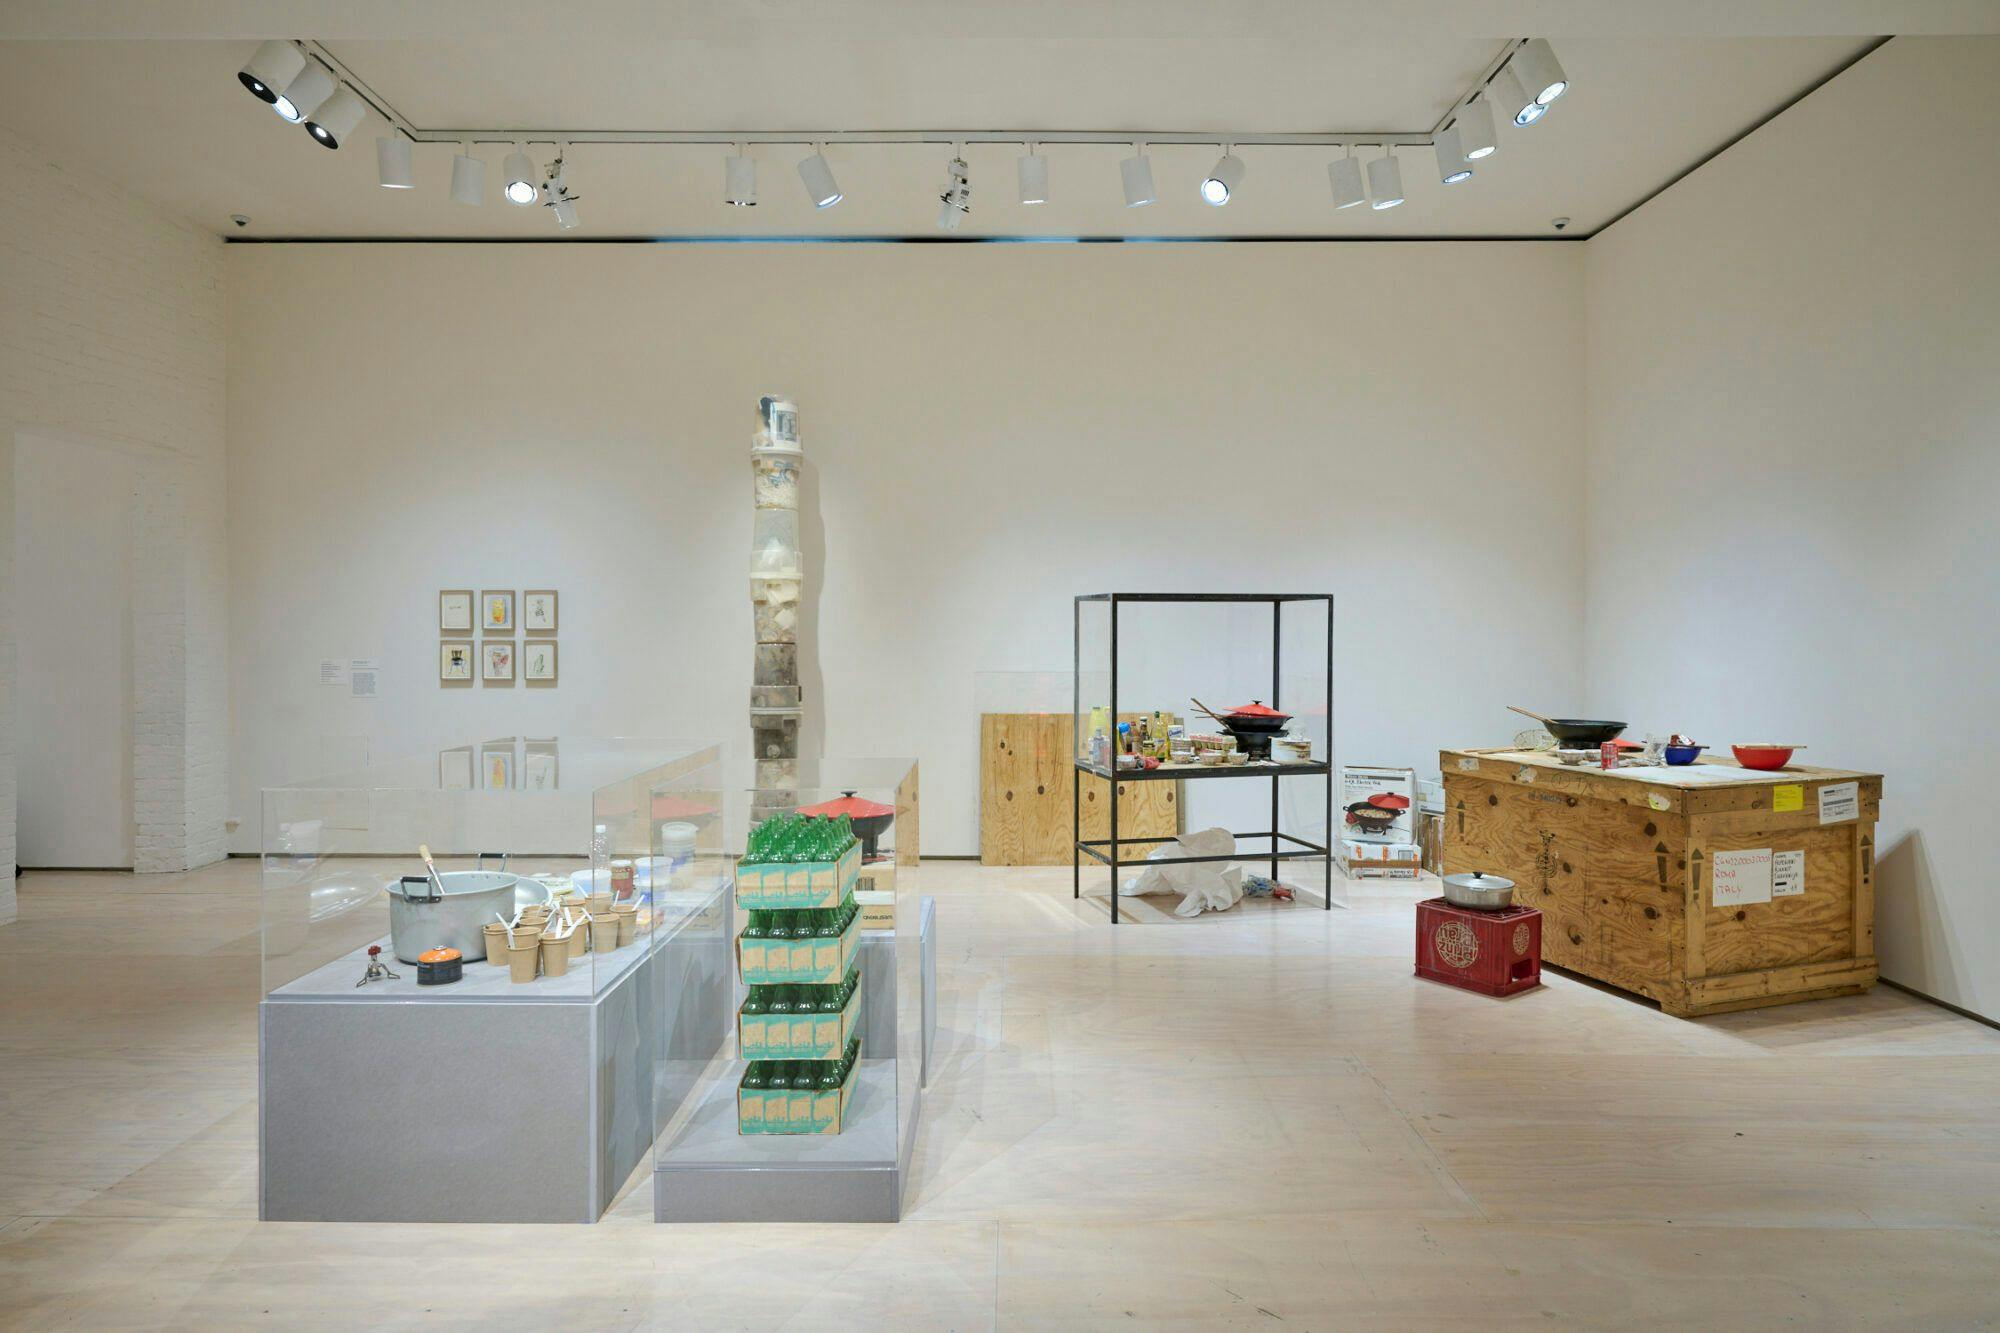  Installation view of the exhibition "Rirkrit Tiravanija: A LOT OF PEOPLE" at MoMA PS1, 2023